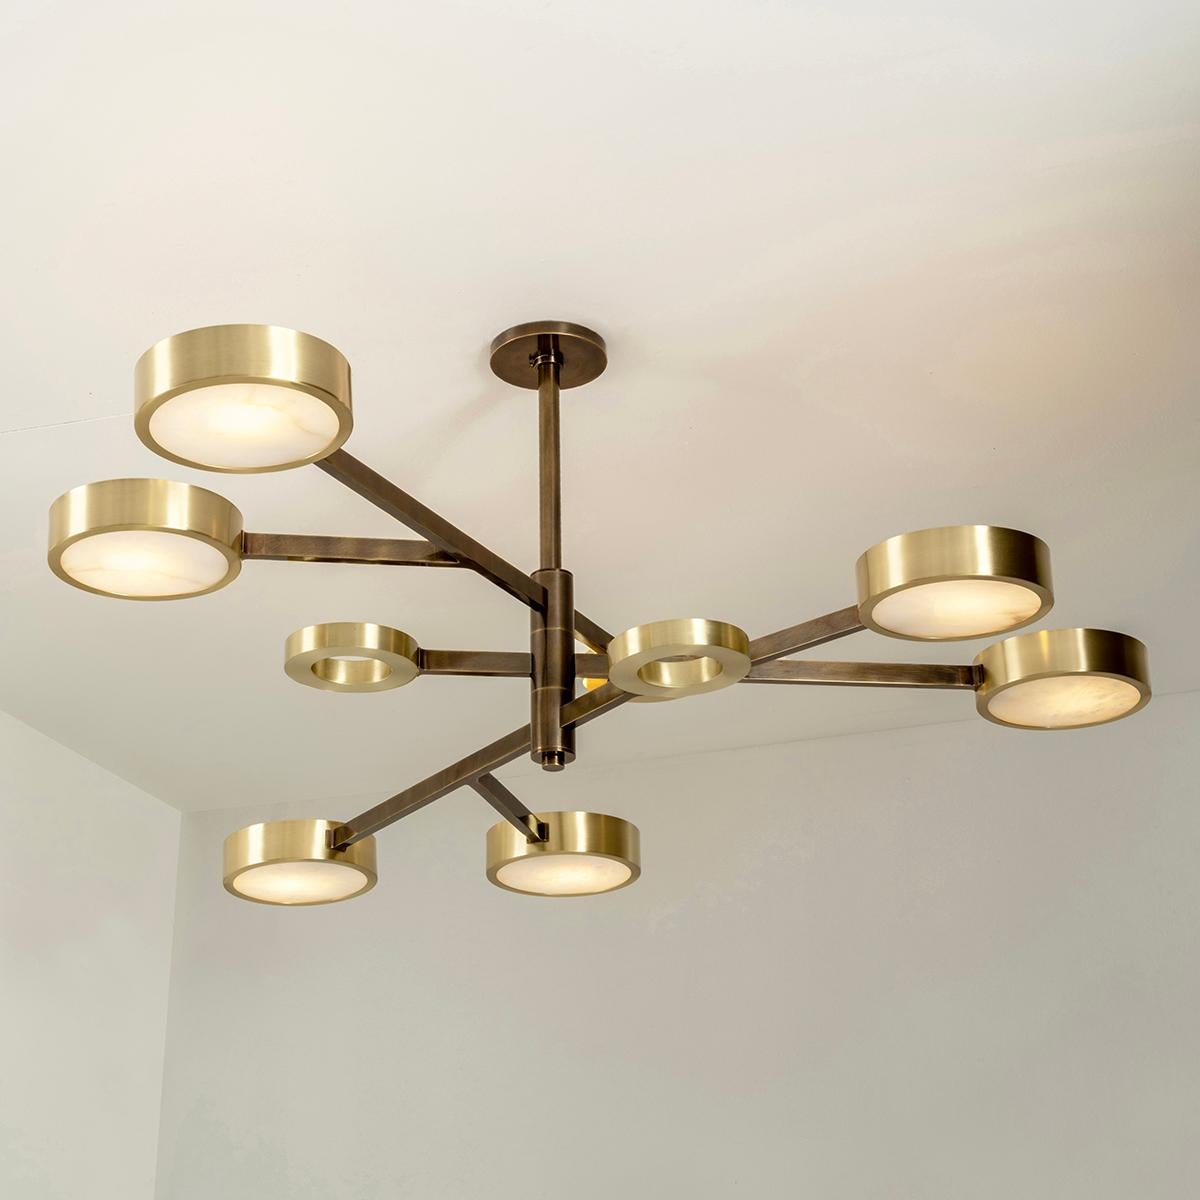 Contemporary Volterra Ceiling Light by Gaspare Asaro-Satin Nickel and Satin Brass Finish For Sale